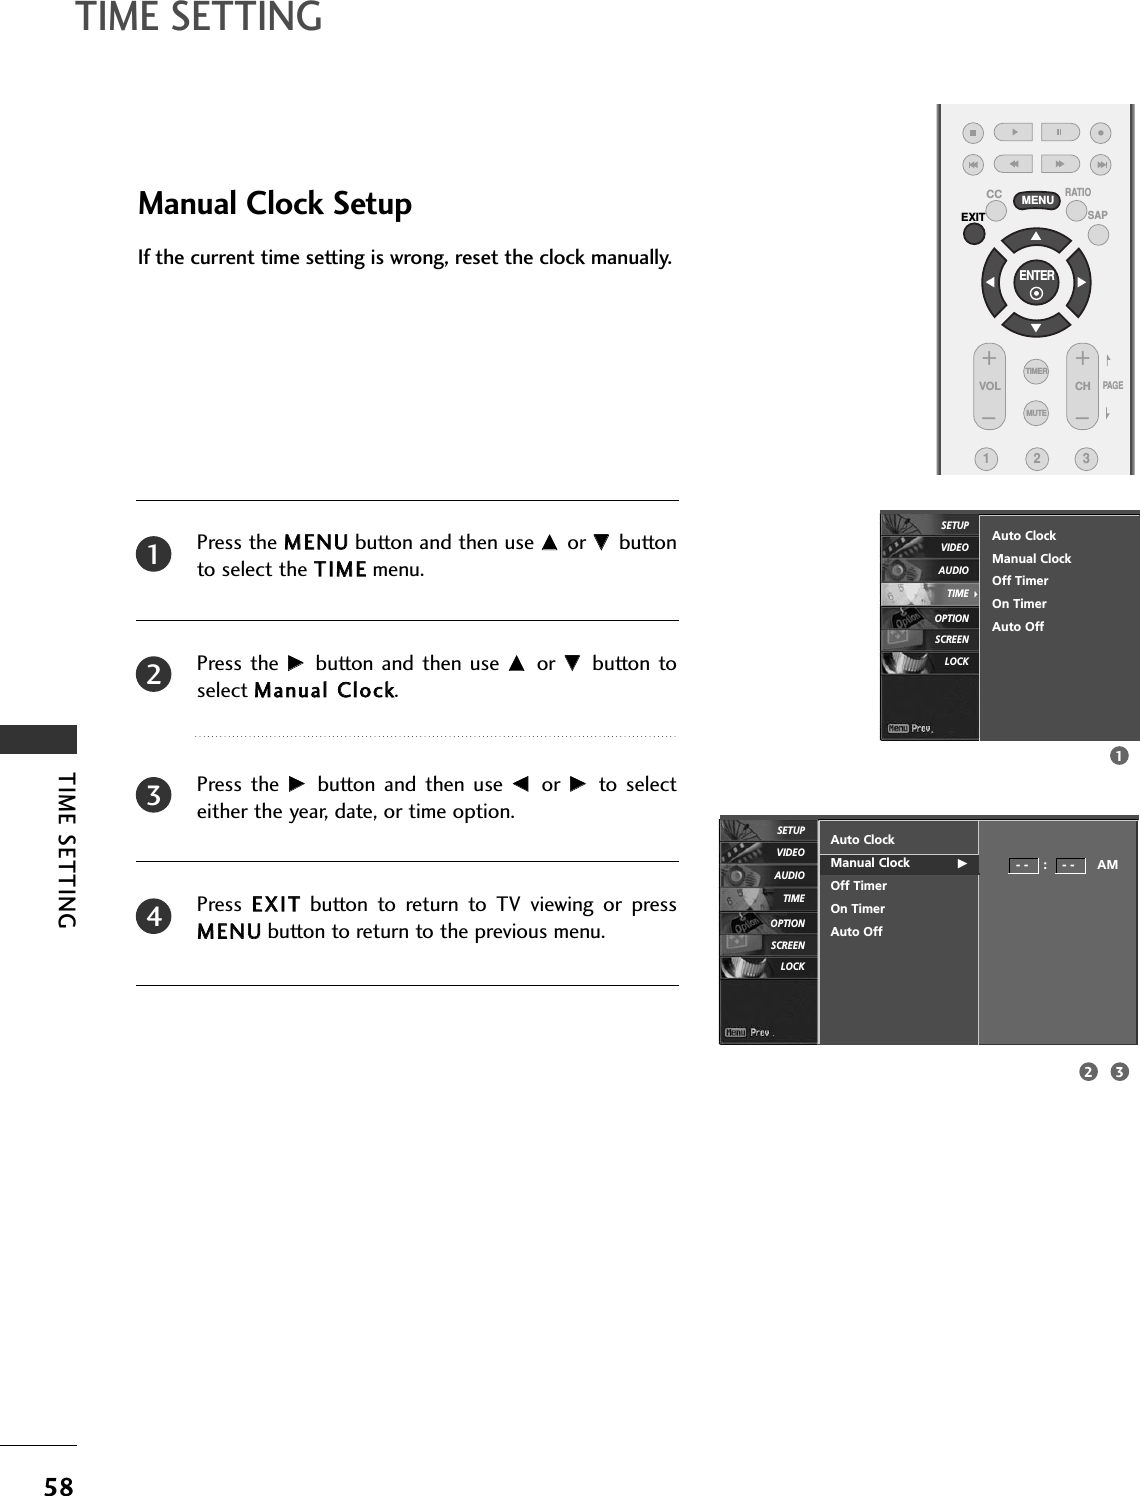 TIME SETTING58TIME SETTINGENTER EXITVOL CHCC MENU123MUTETIMERSAPRATIOPAG EManual Clock SetupPress the MMEENNUUbutton and then use DD or EE buttonto select the TTIIMMEEmenu.Press the  GG button  and  then use DD or EE button toselect MMaannuuaall CClloocckk. Press  the  GG button  and  then  use FF or  GG to  selecteither the year, date, or time option.Press  EEXXIITTbutton  to  return  to  TV  viewing  or  pressMMEENNUUbutton to return to the previous menu.If the current time setting is wrong, reset the clock manually.Auto ClockManual Clock GOff TimerOn TimerAuto Off- -    :    - -      AM2341132Auto ClockManual ClockOff TimerOn TimerAuto OffSCREENLOCKOPTIONTIMEAUDIOVIDEOSETUPSCREENLOCKOPTIONTIMEAUDIOVIDEOSETUP